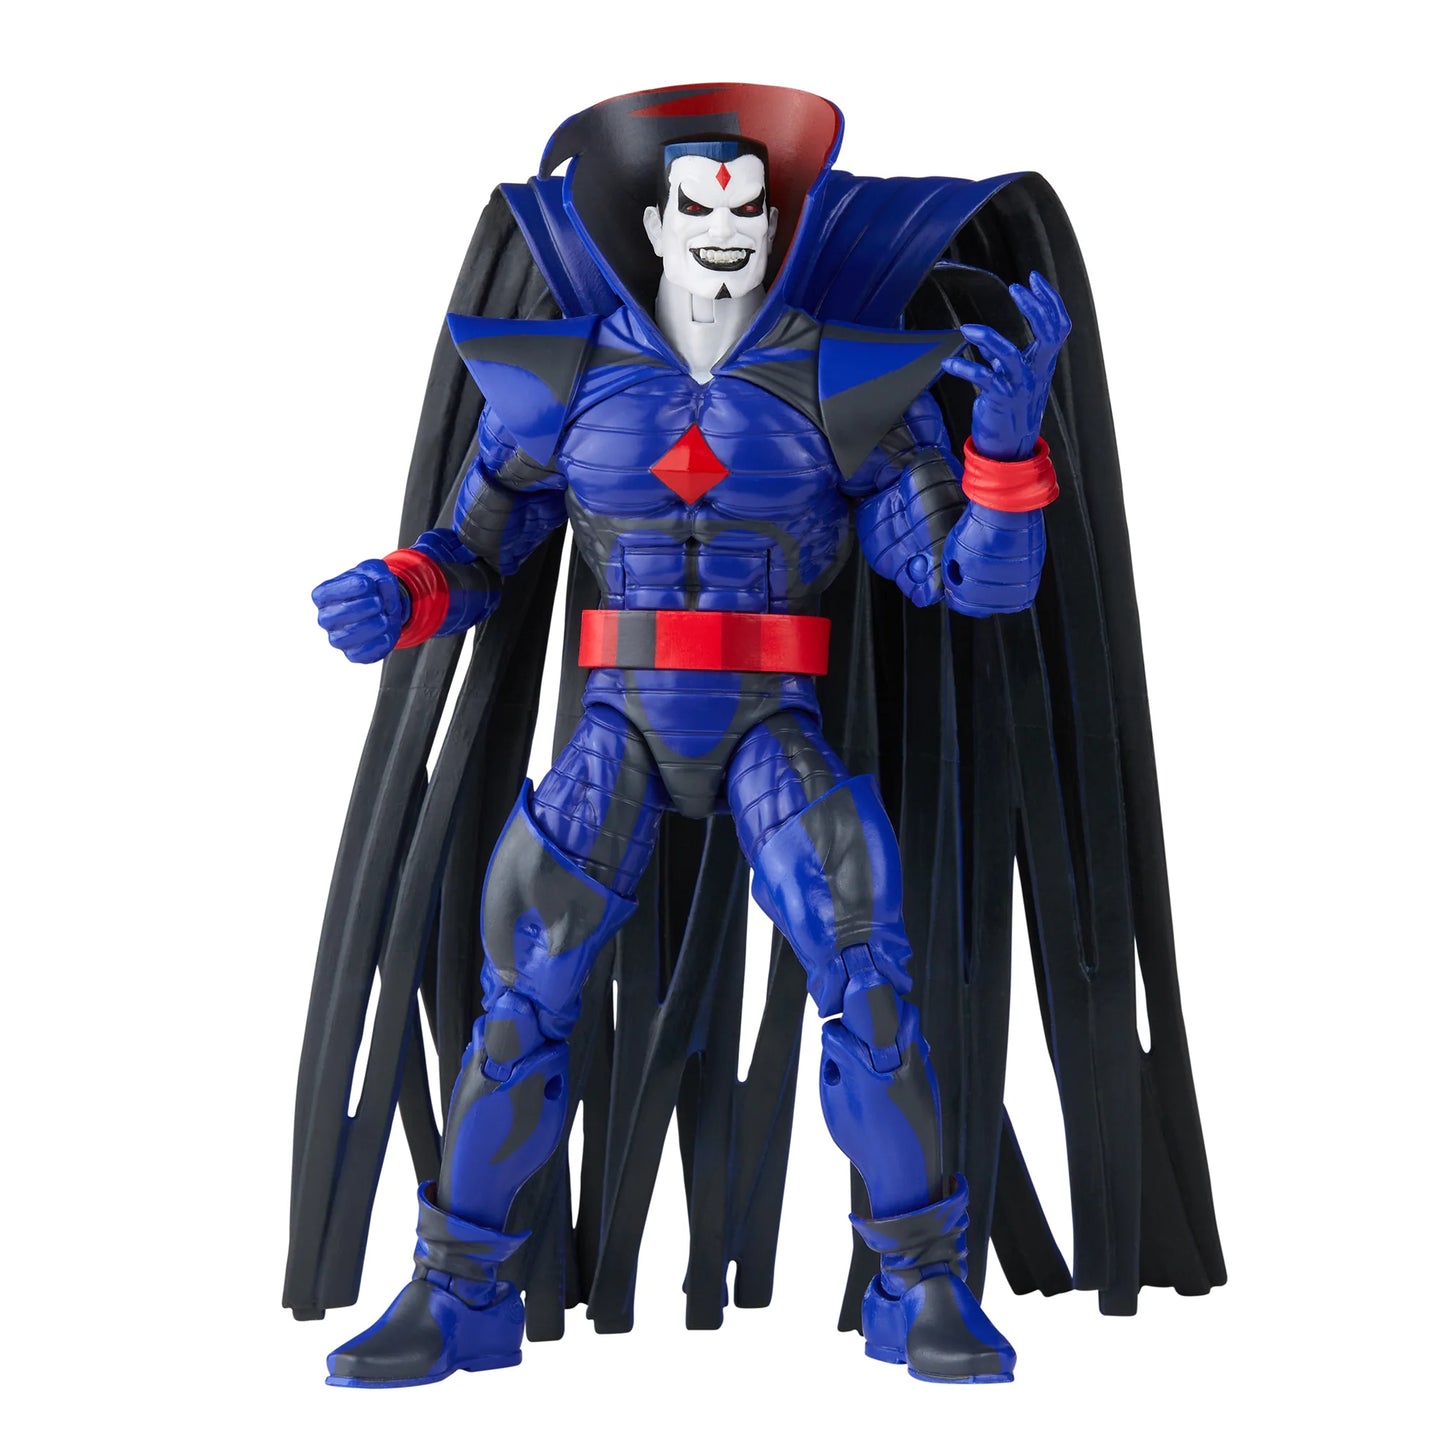 A 6-inch Marvel Legends Series X-Men Mr. Sinister action figure, featuring unique sculpting and cel-shaded deco, presented in a '90s video cassette-inspired packaging.